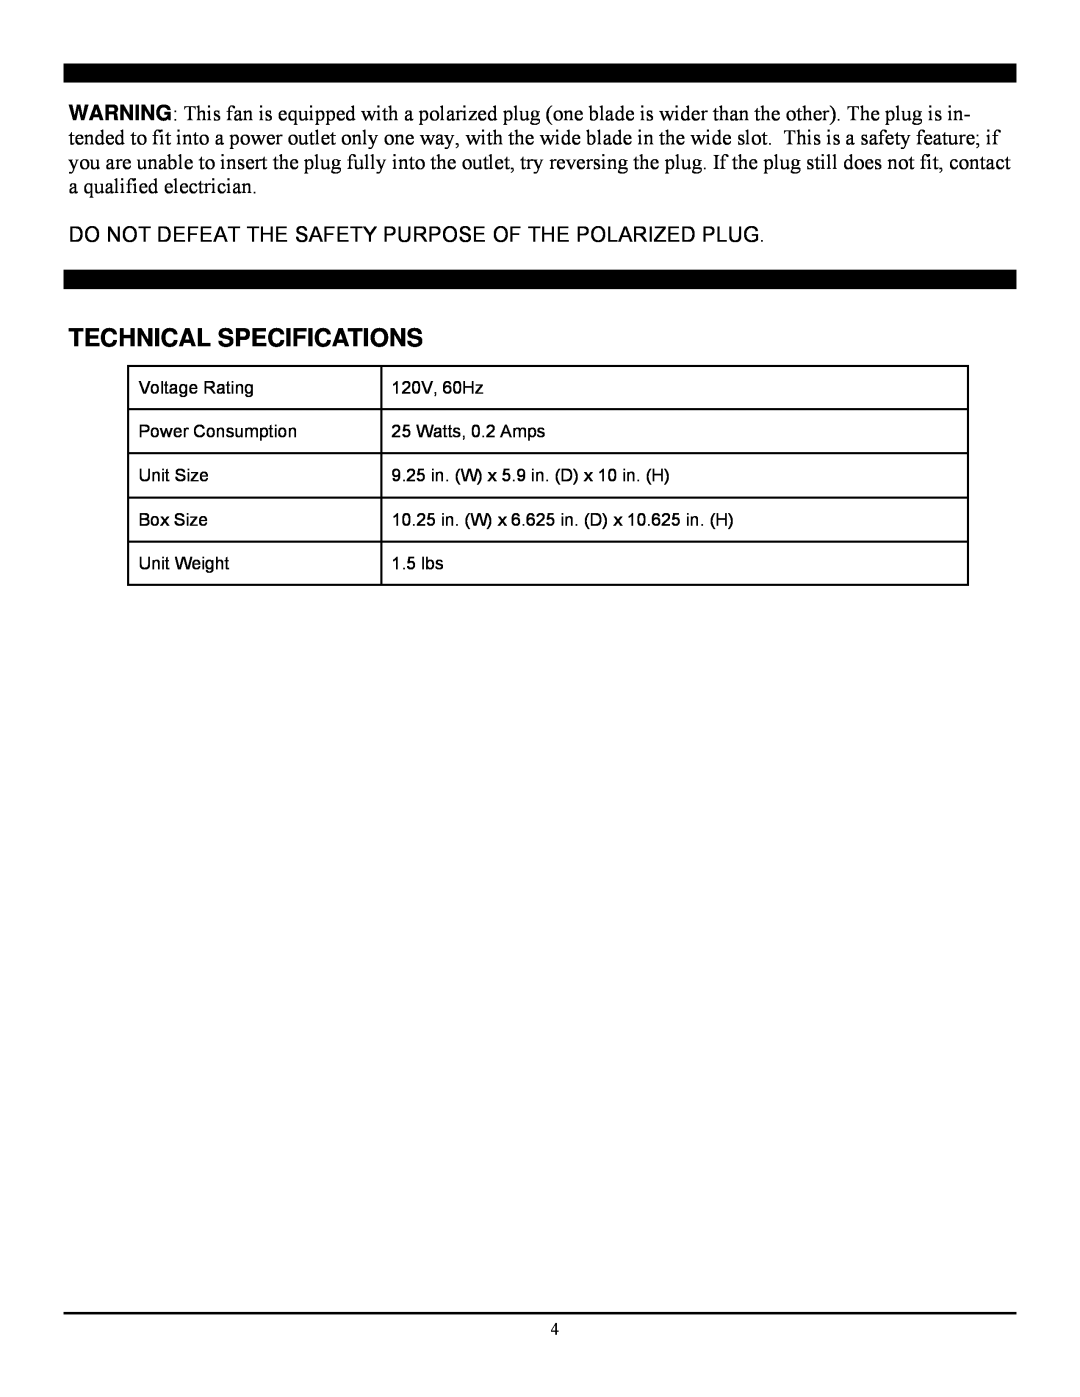 Soleus Air ft1-20-10 manual Technical Specifications 